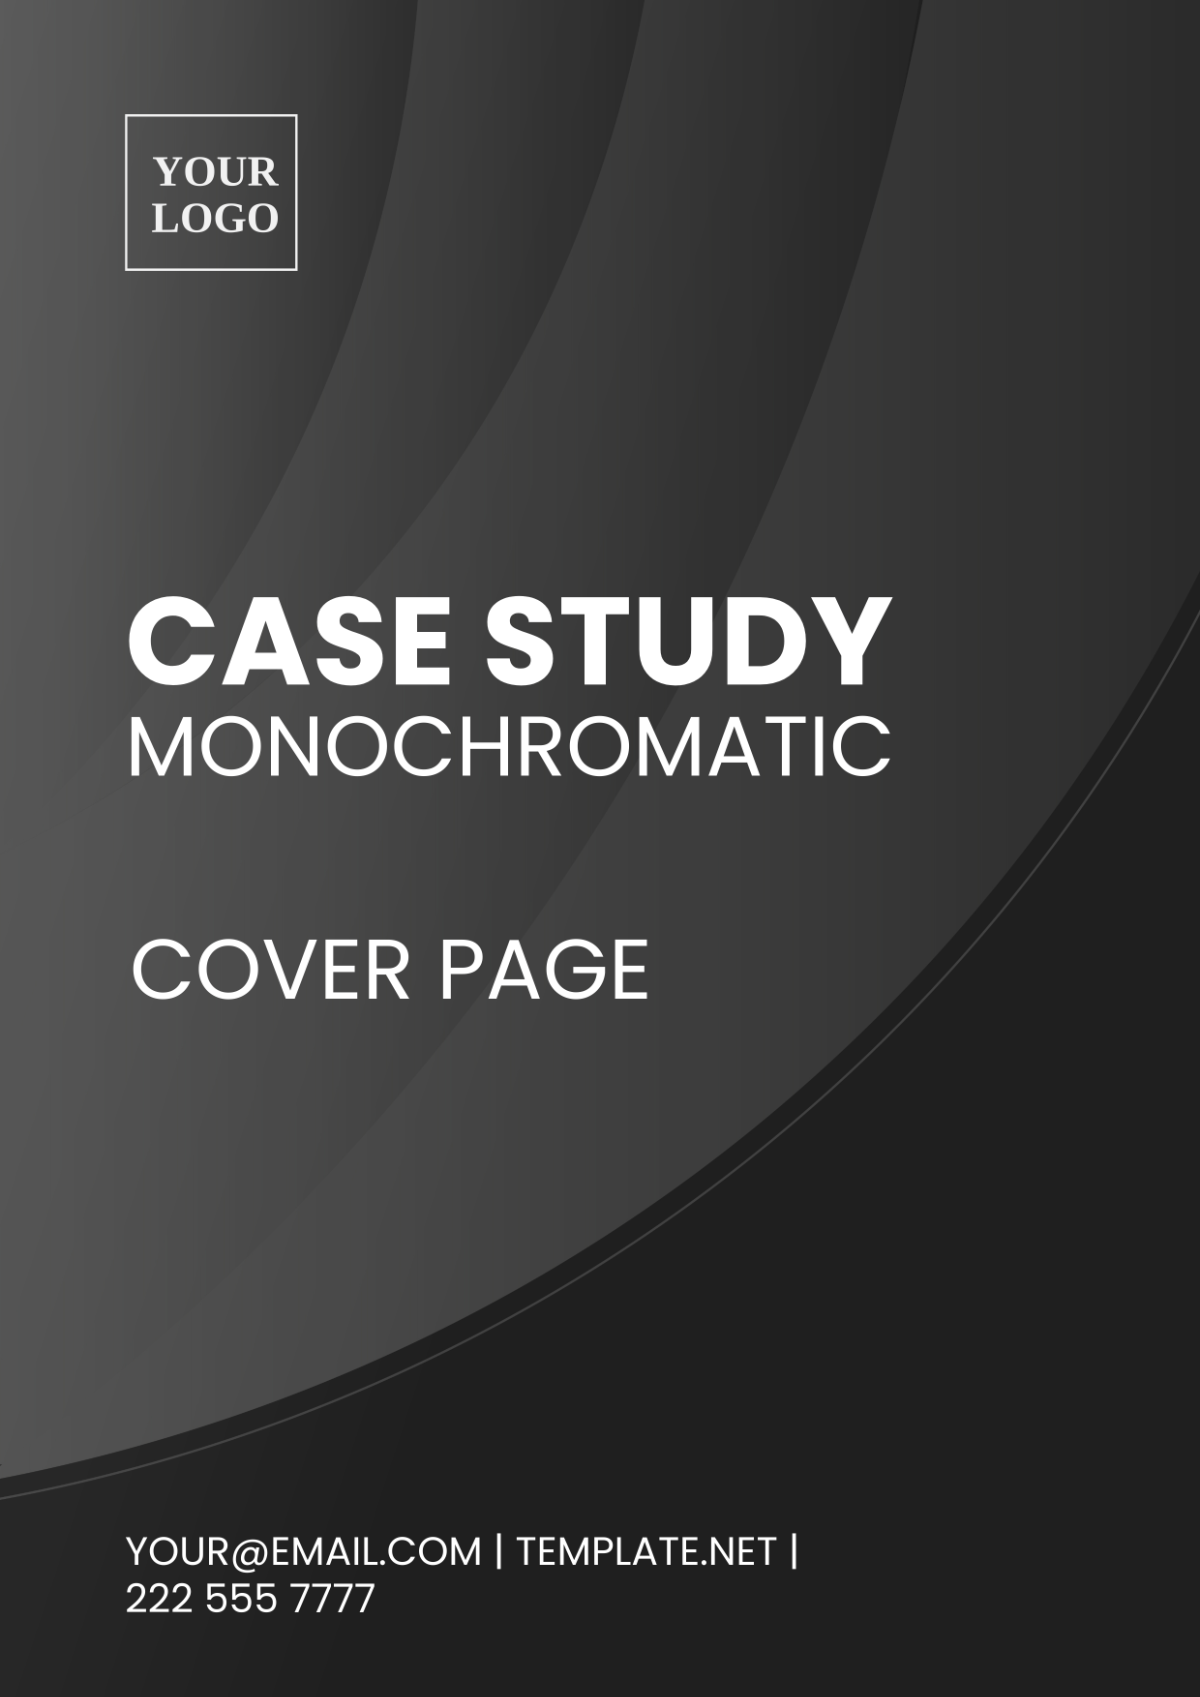 Case Study Monochromatic Cover Page Template